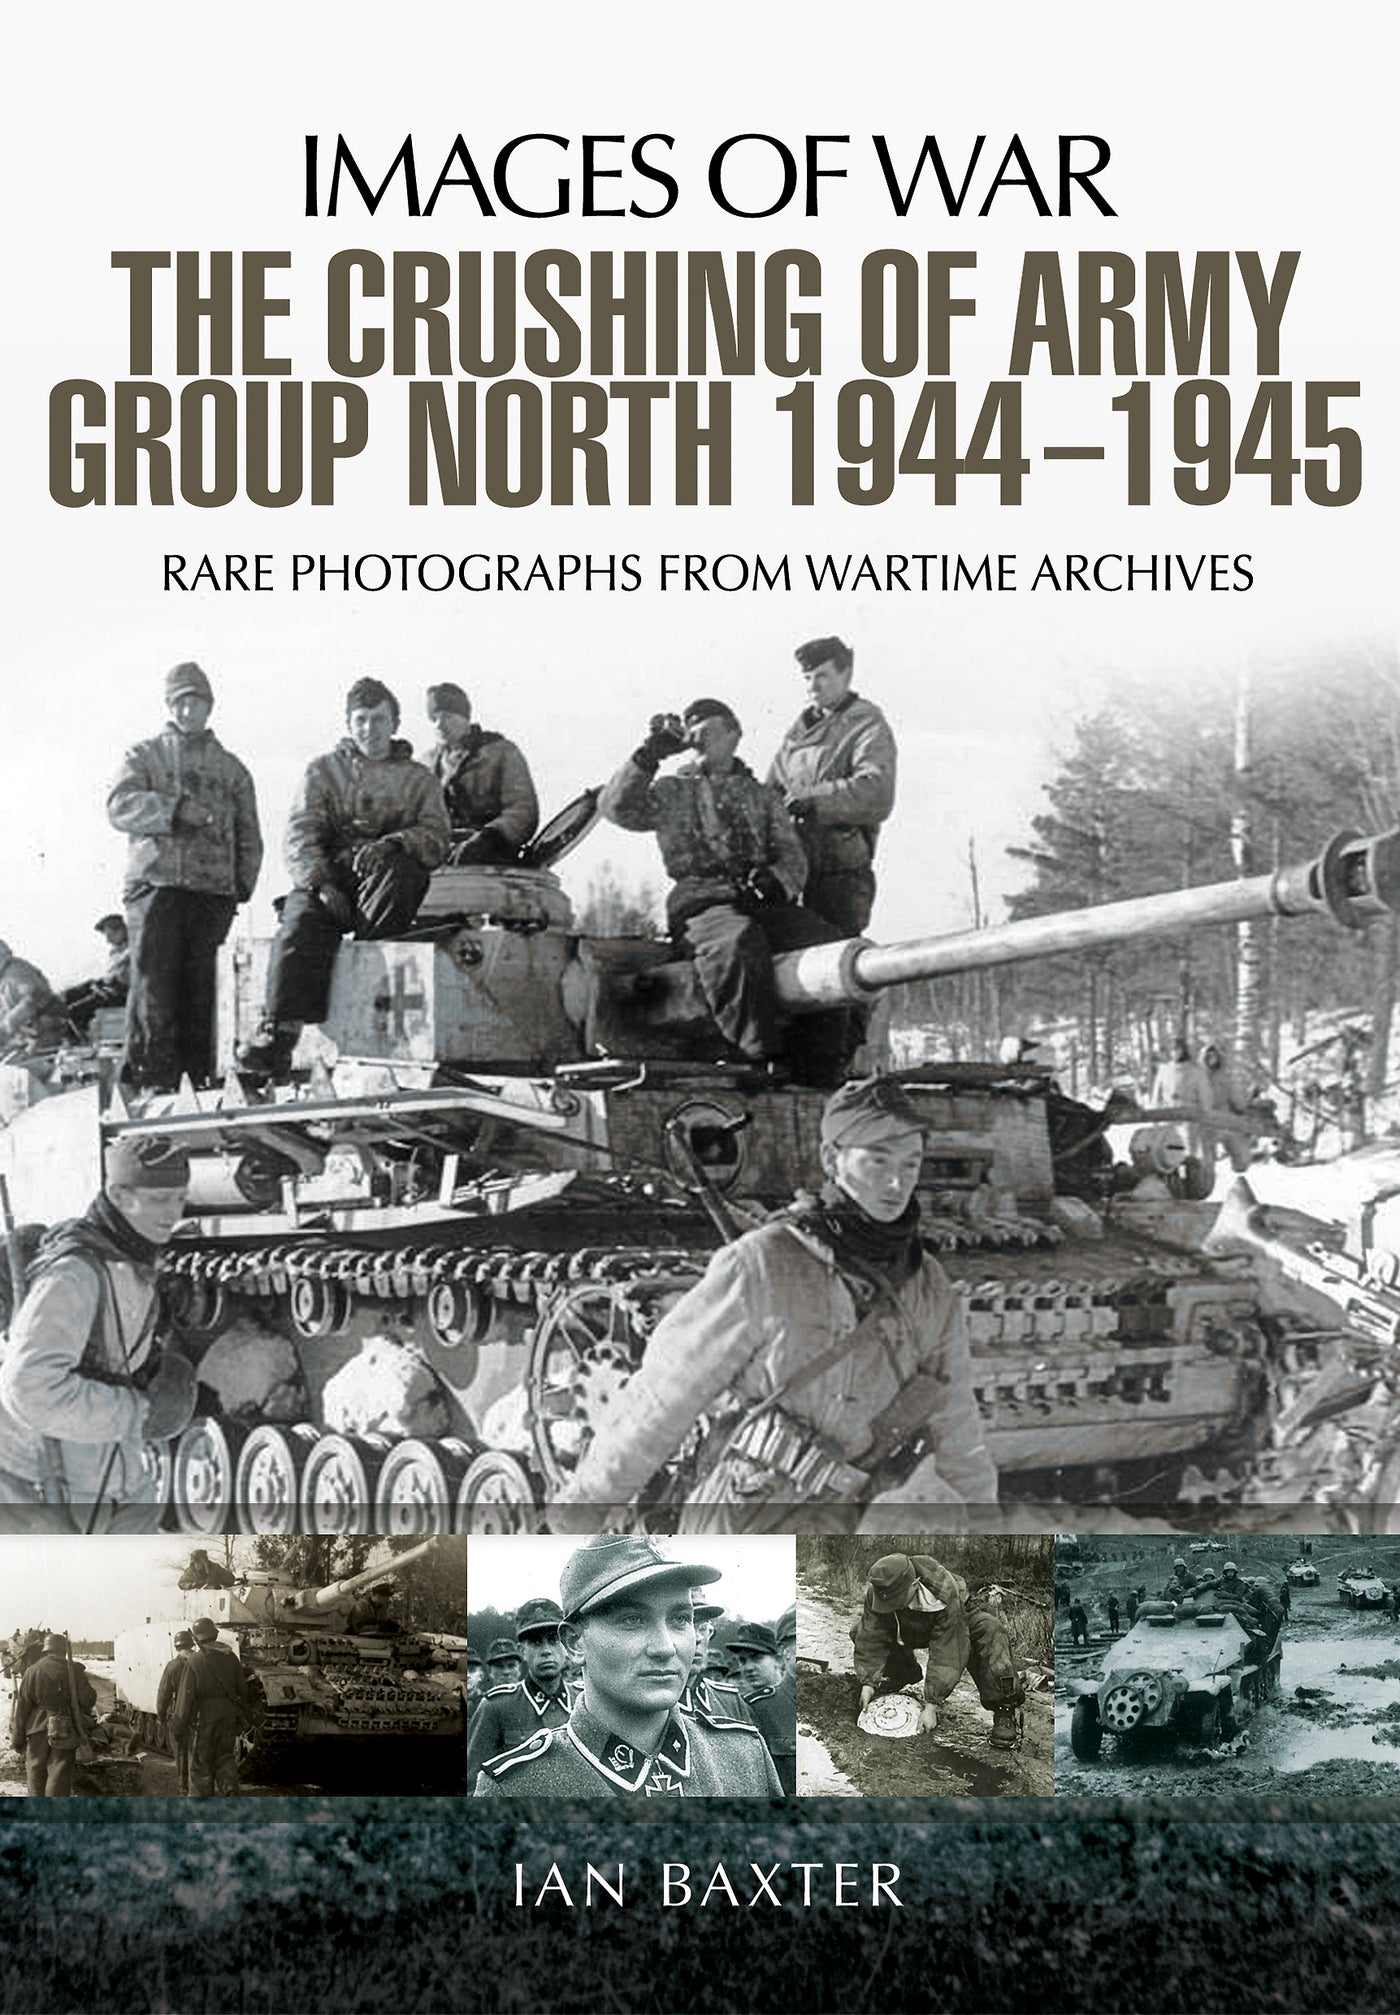 The Crushing of Army Group North 1944–1945 on the Eastern Front